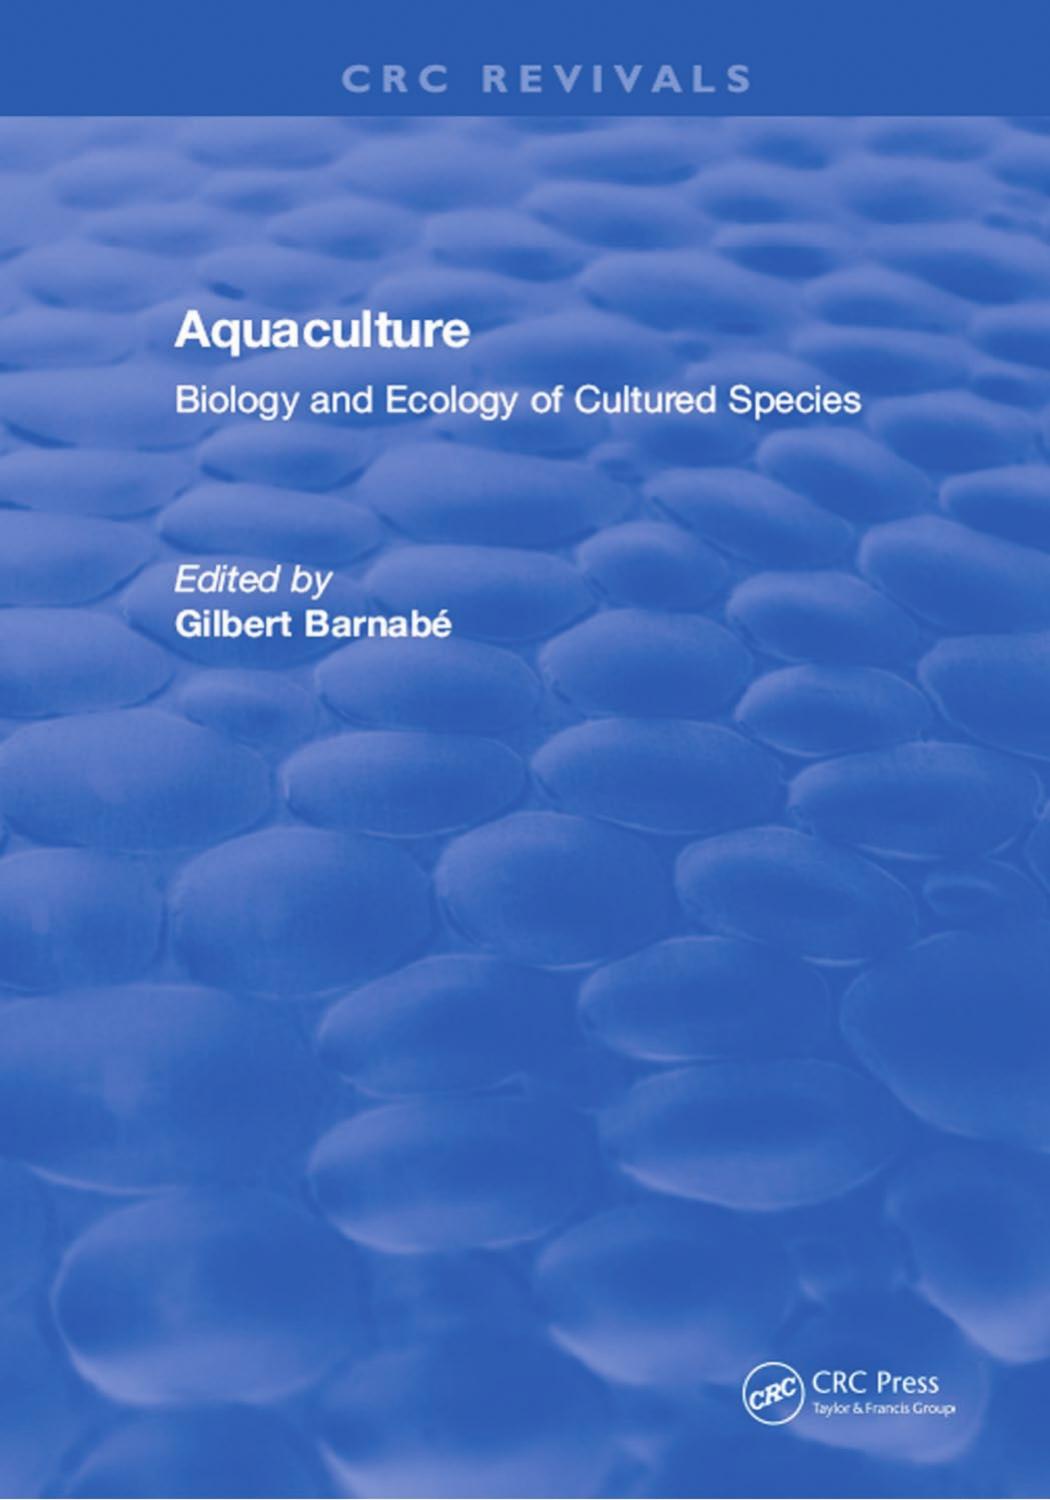 AQUACULTURE: Biology and Ecology of Cultured Species